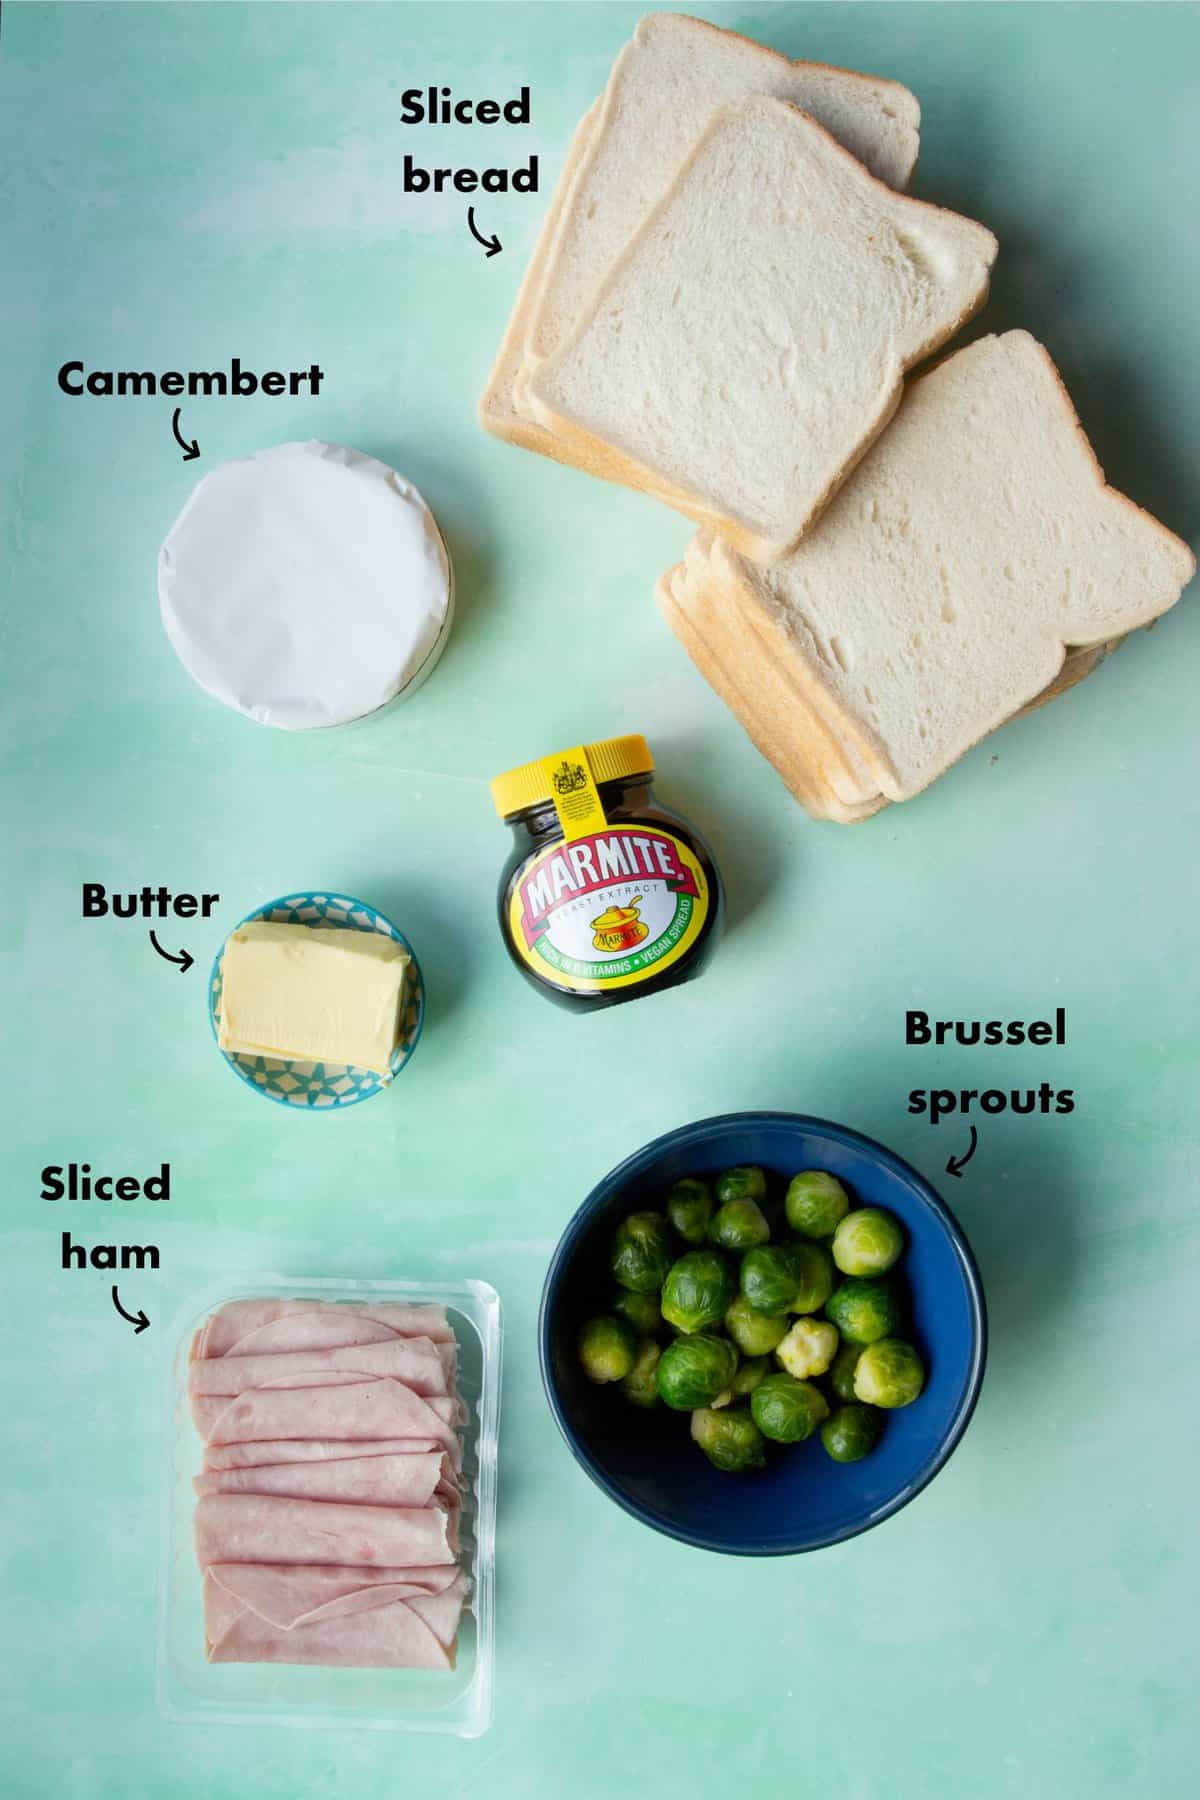 Ingredients to make a Marmite Ham & Camembert Festive Toastie including Camembert, white bread, Marmite, Brussel sprouts, ham and butter.